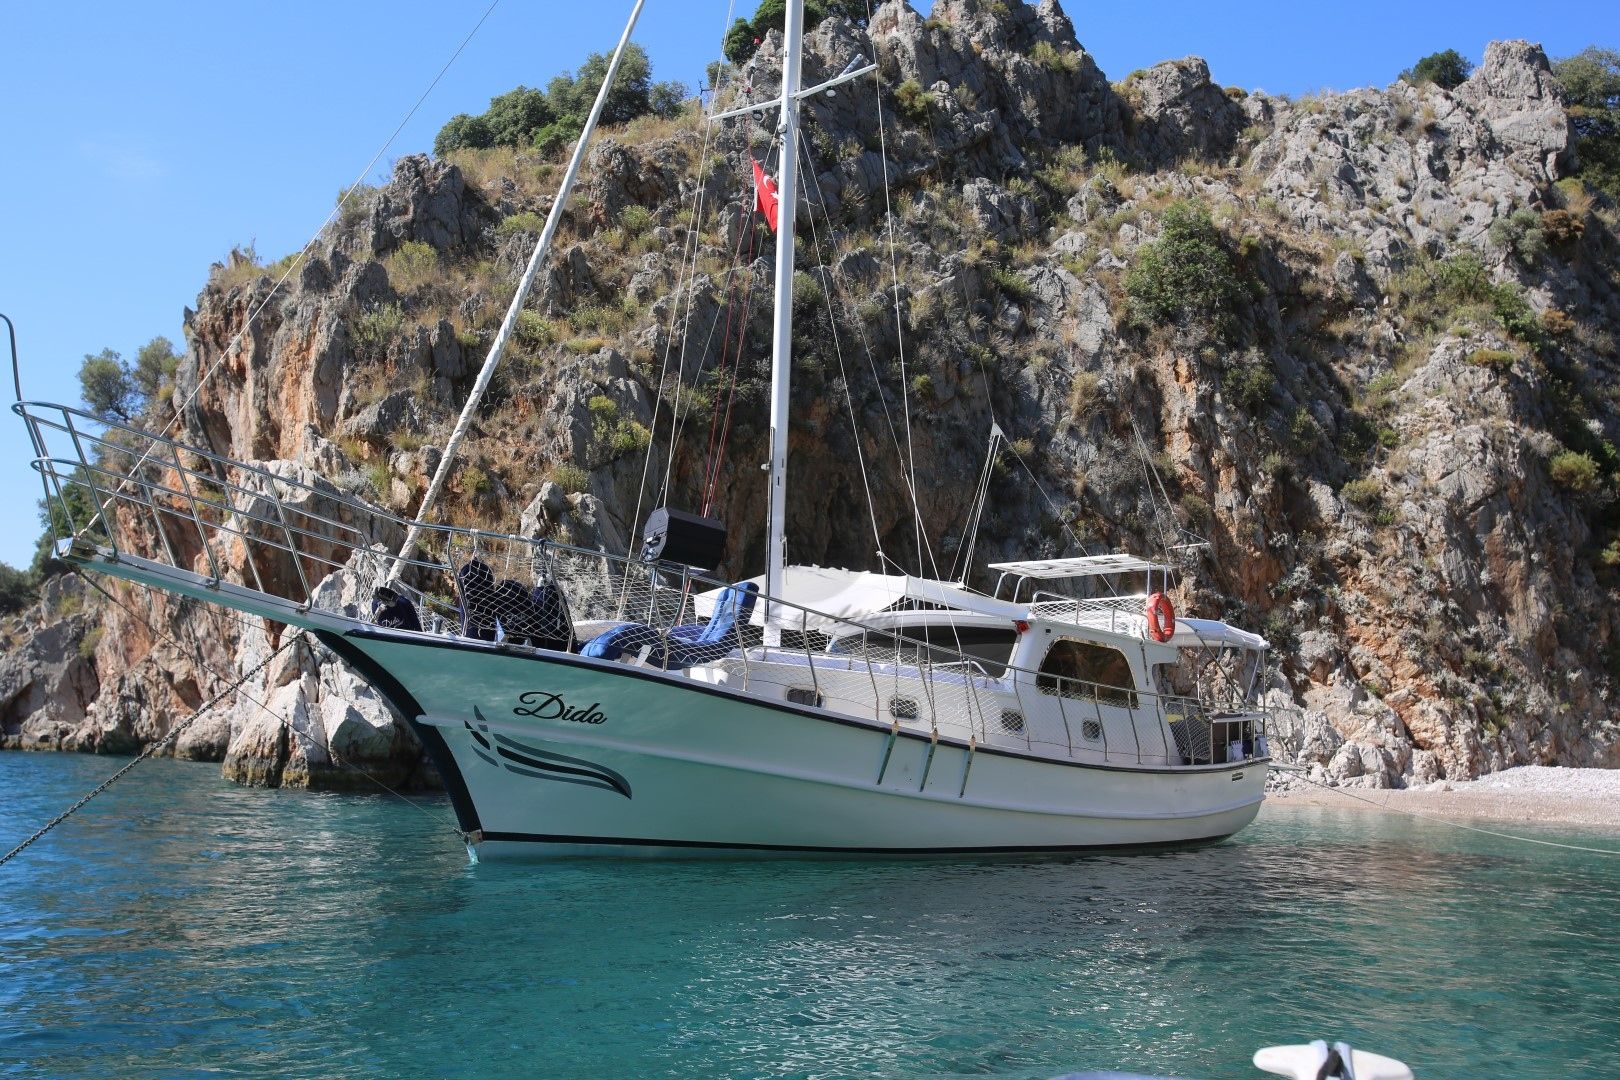 Dido Gulet Yacht. Port Side View.